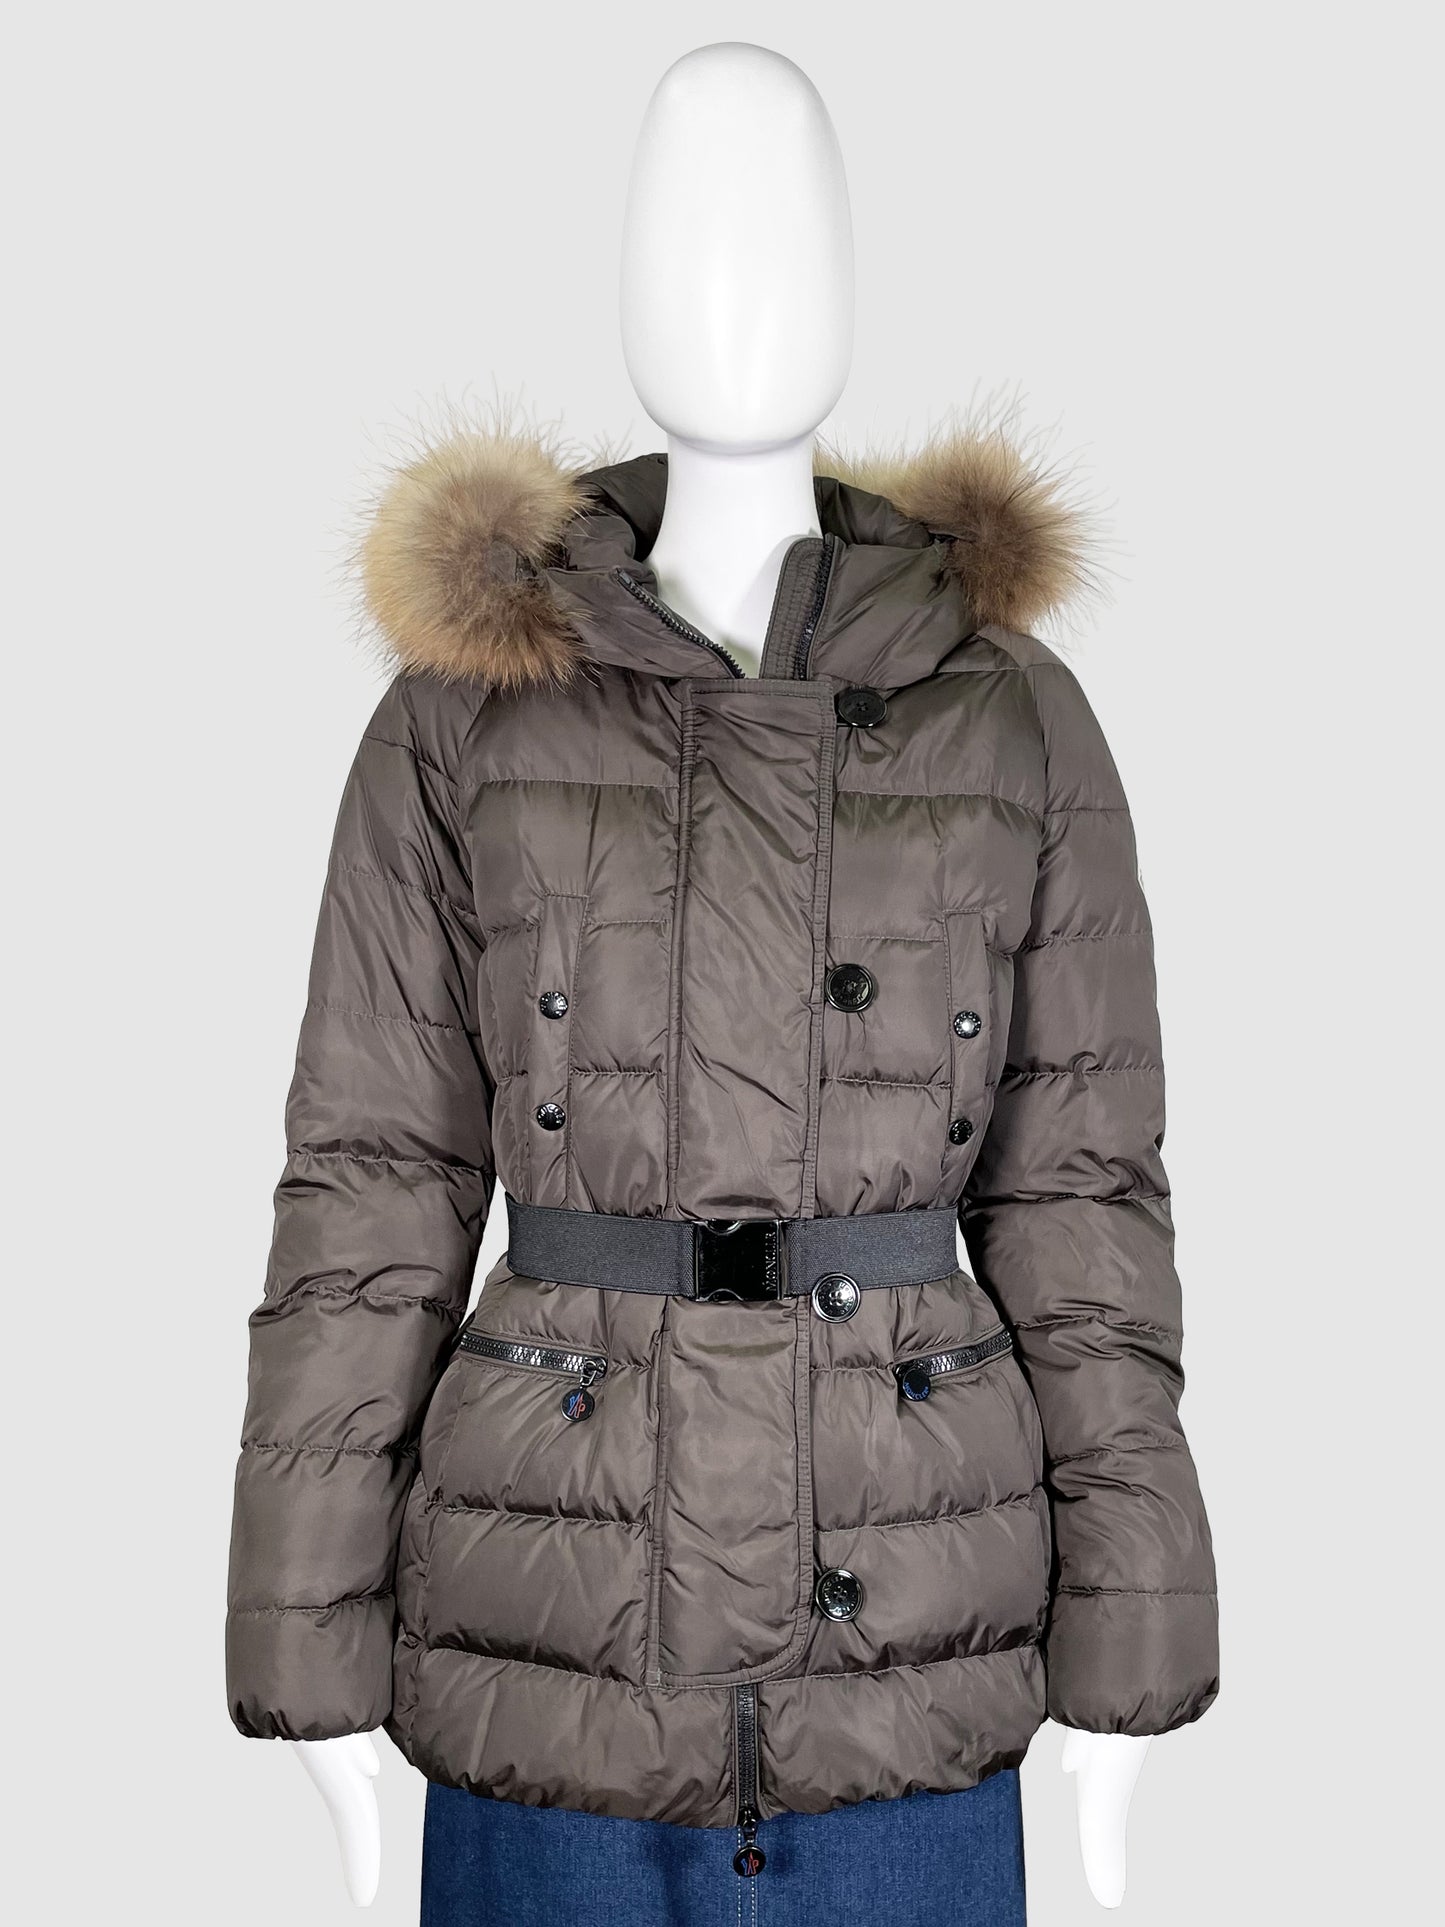 Moncler Puffer Coat with Belt- Size 3